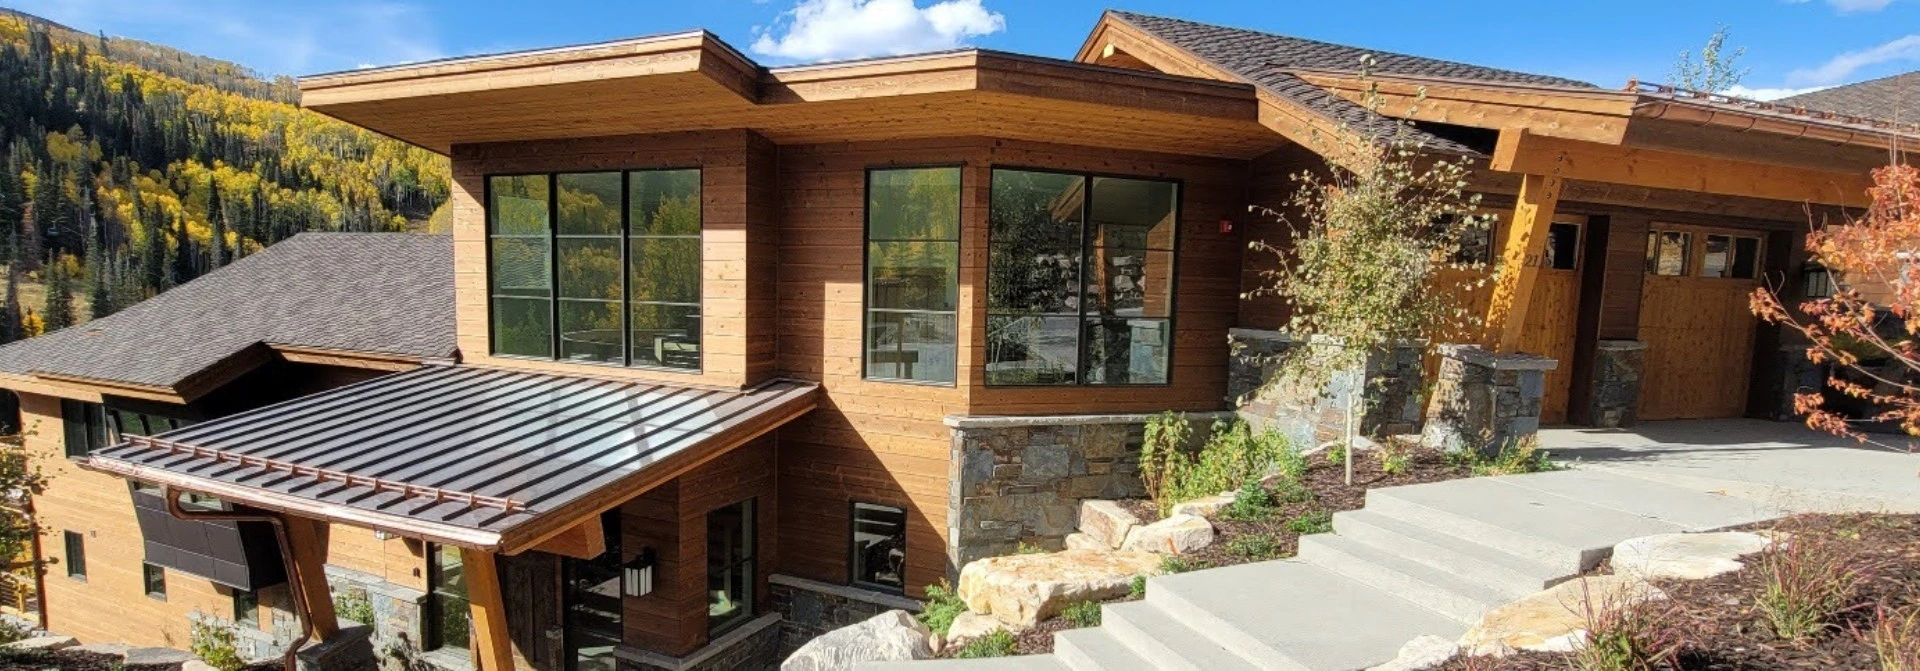 View Real Estate Listings for Sale of Newly Built Home in Deer Valley and Park City, Utah